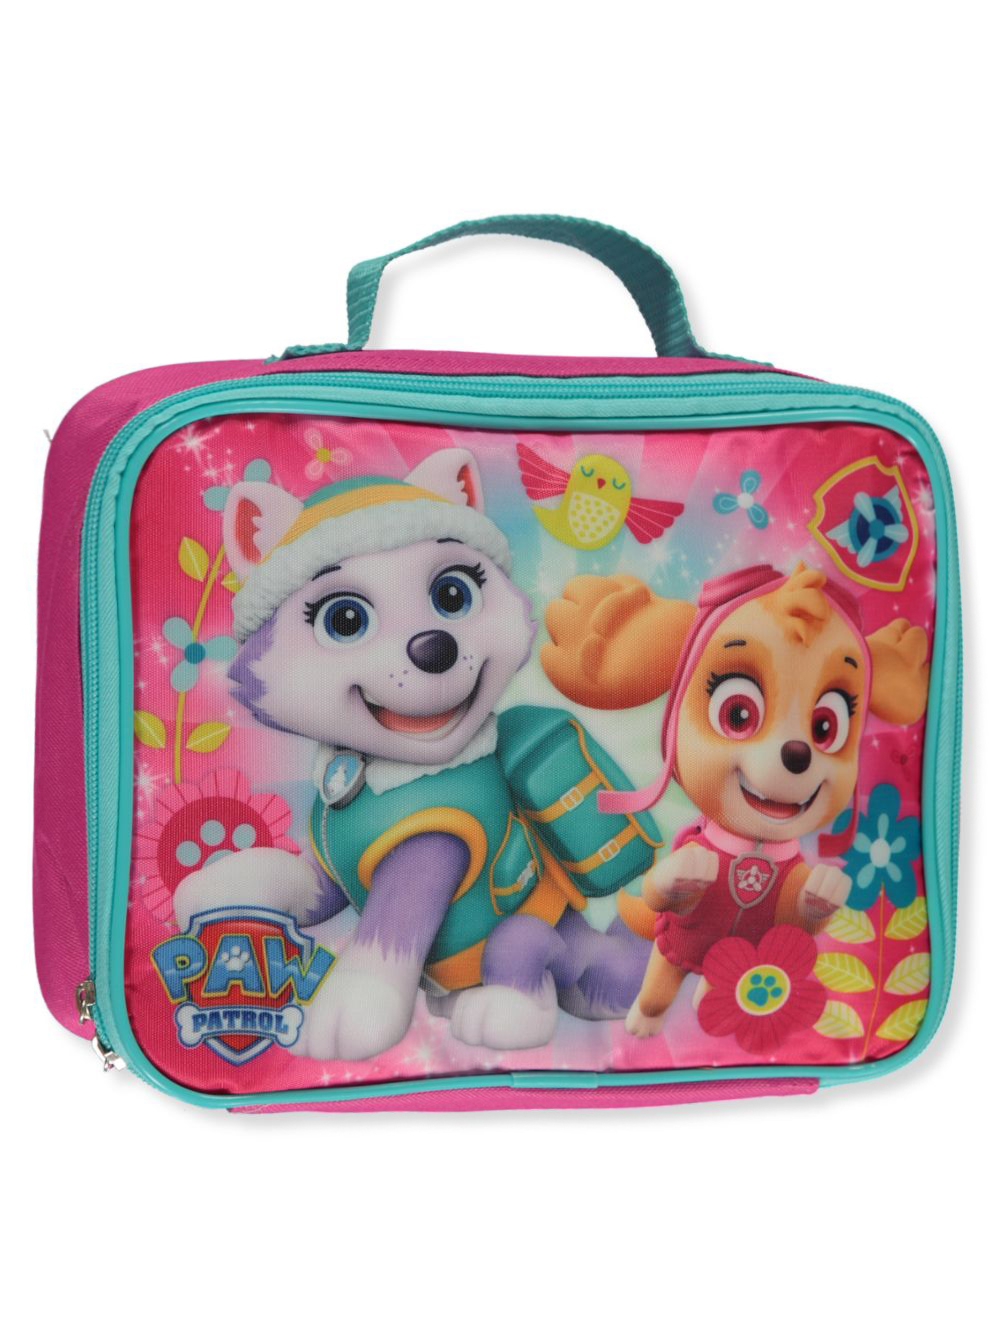 GIRLS PAW PATROL 3 PIECE LUXURY LUNCH BOX SET 100% OFFICIAL BRAND NEW 